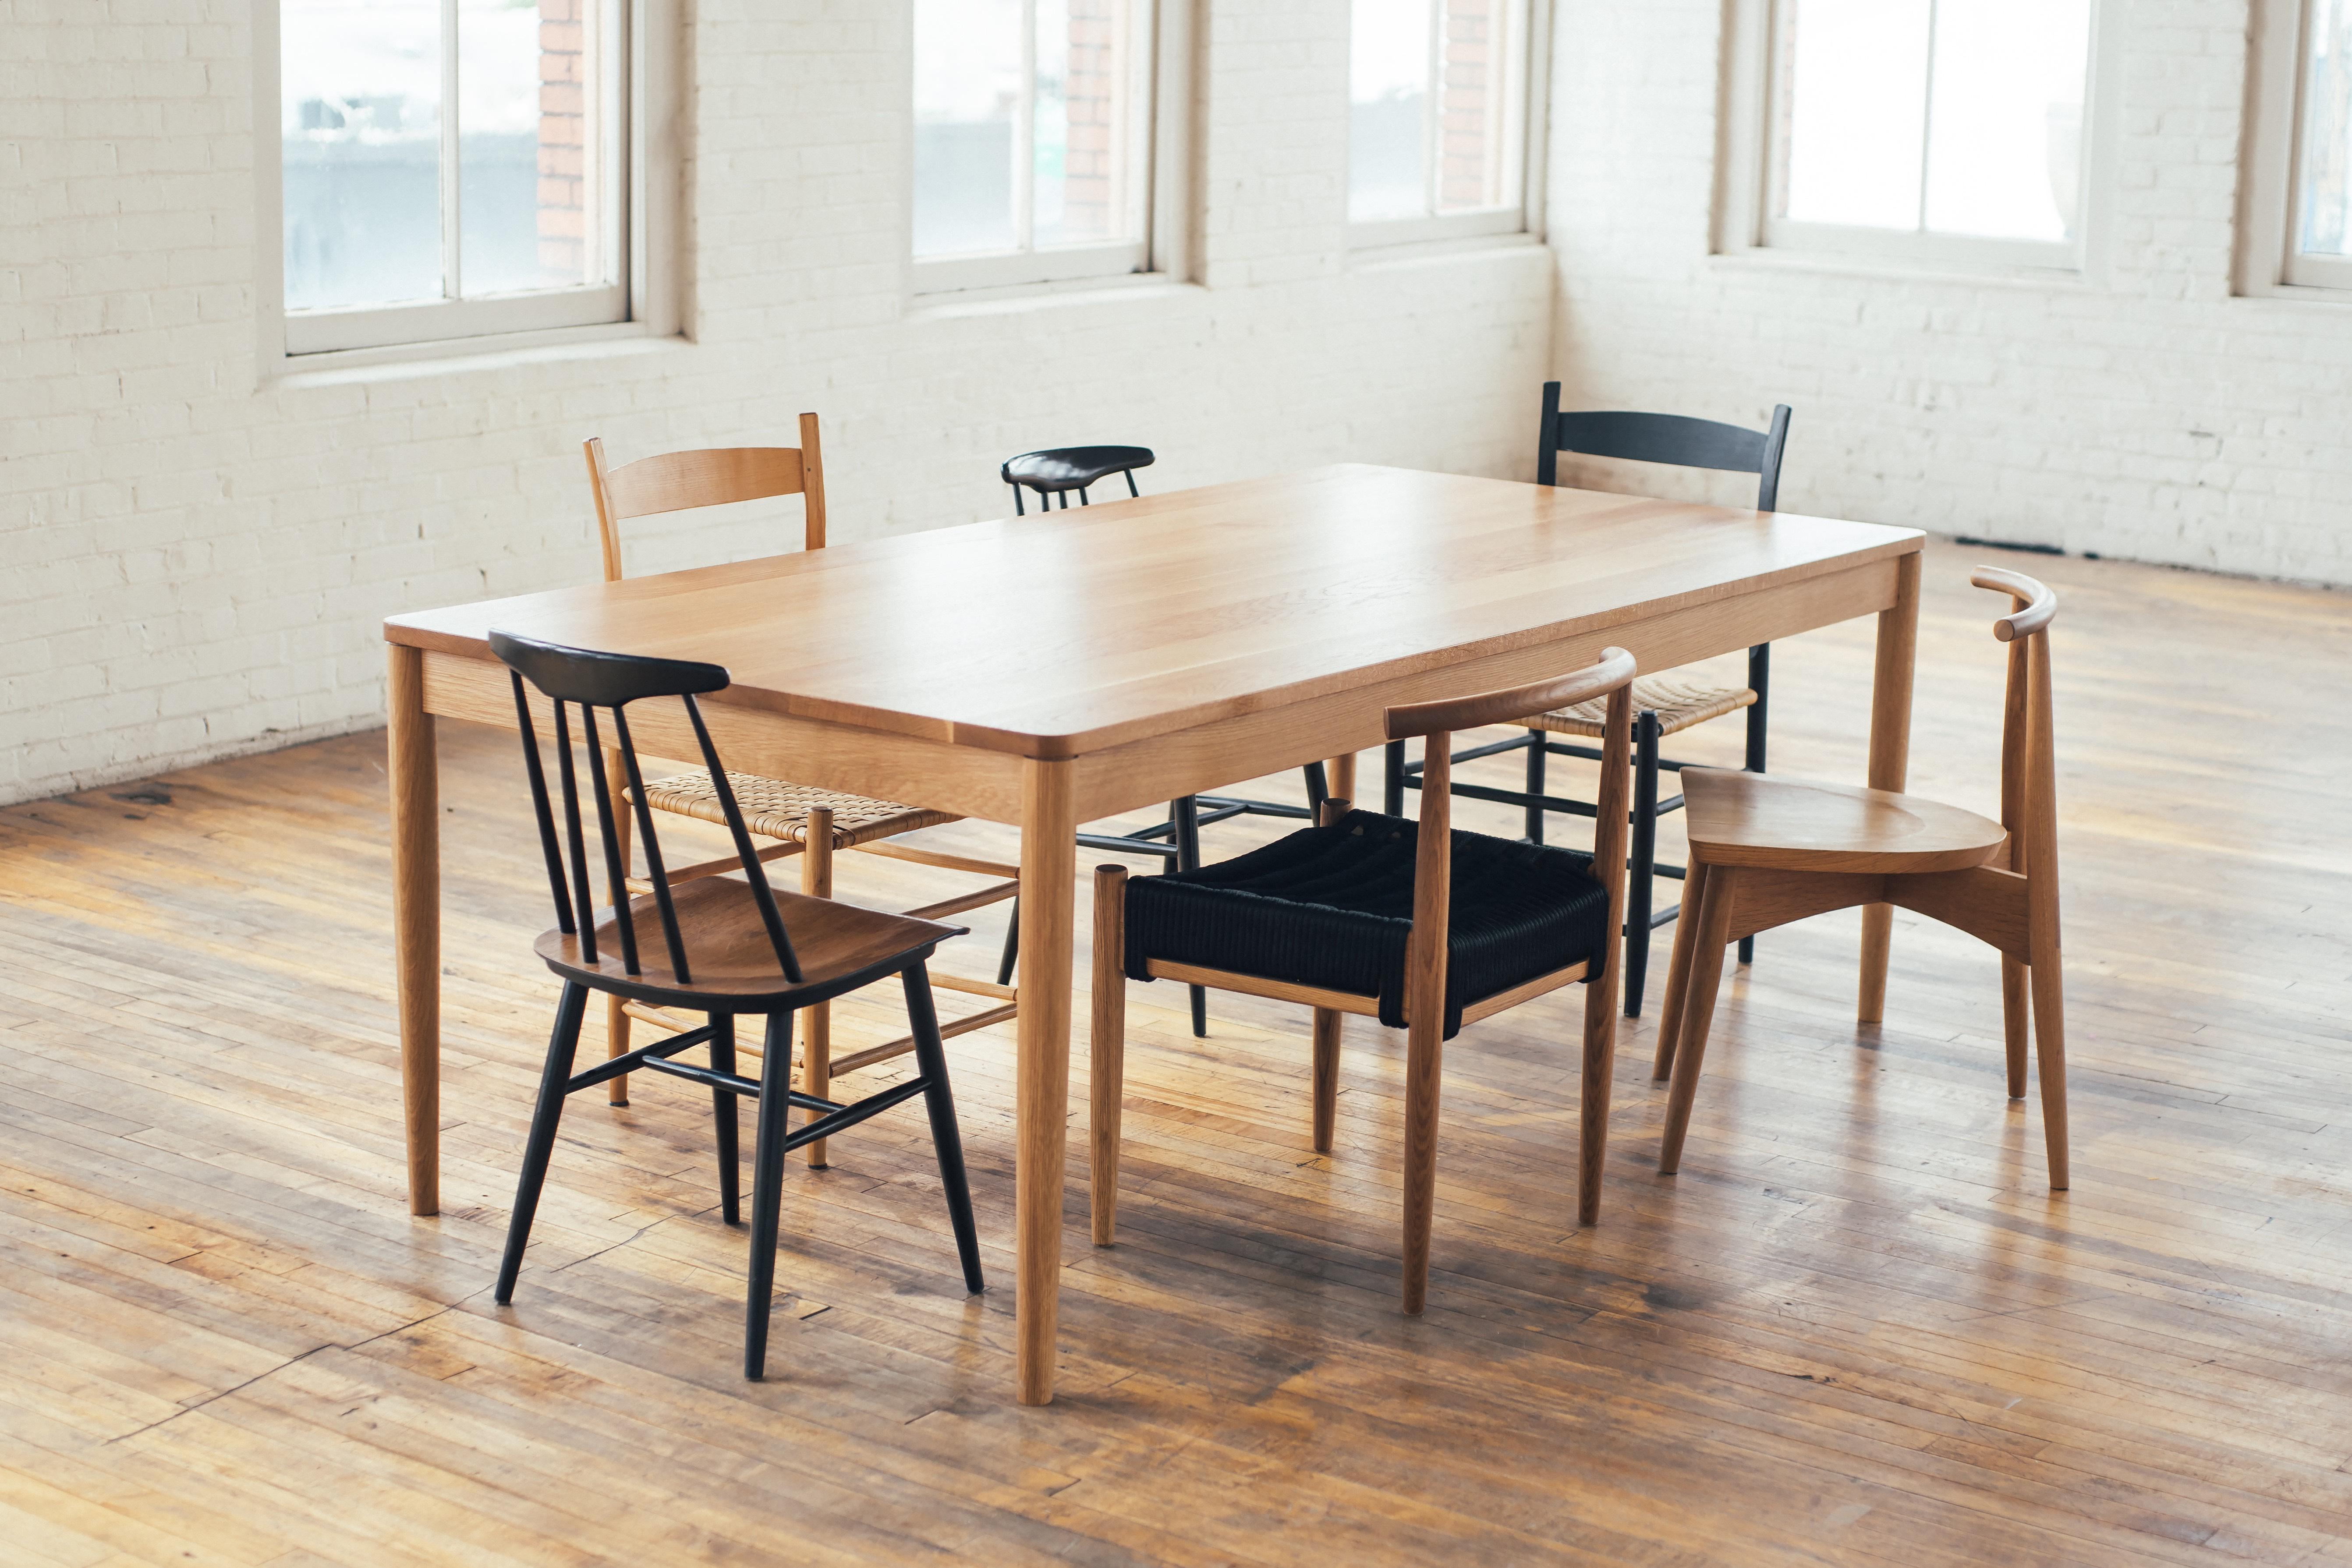 Originally designed as a dining table for a growing family, the Calvin Family Table was inspired by old farmhouse tables: simple and graceful, yet utilitarian. Calvin’s legs are set all the way out into the far corners to leave ample leg room. Each